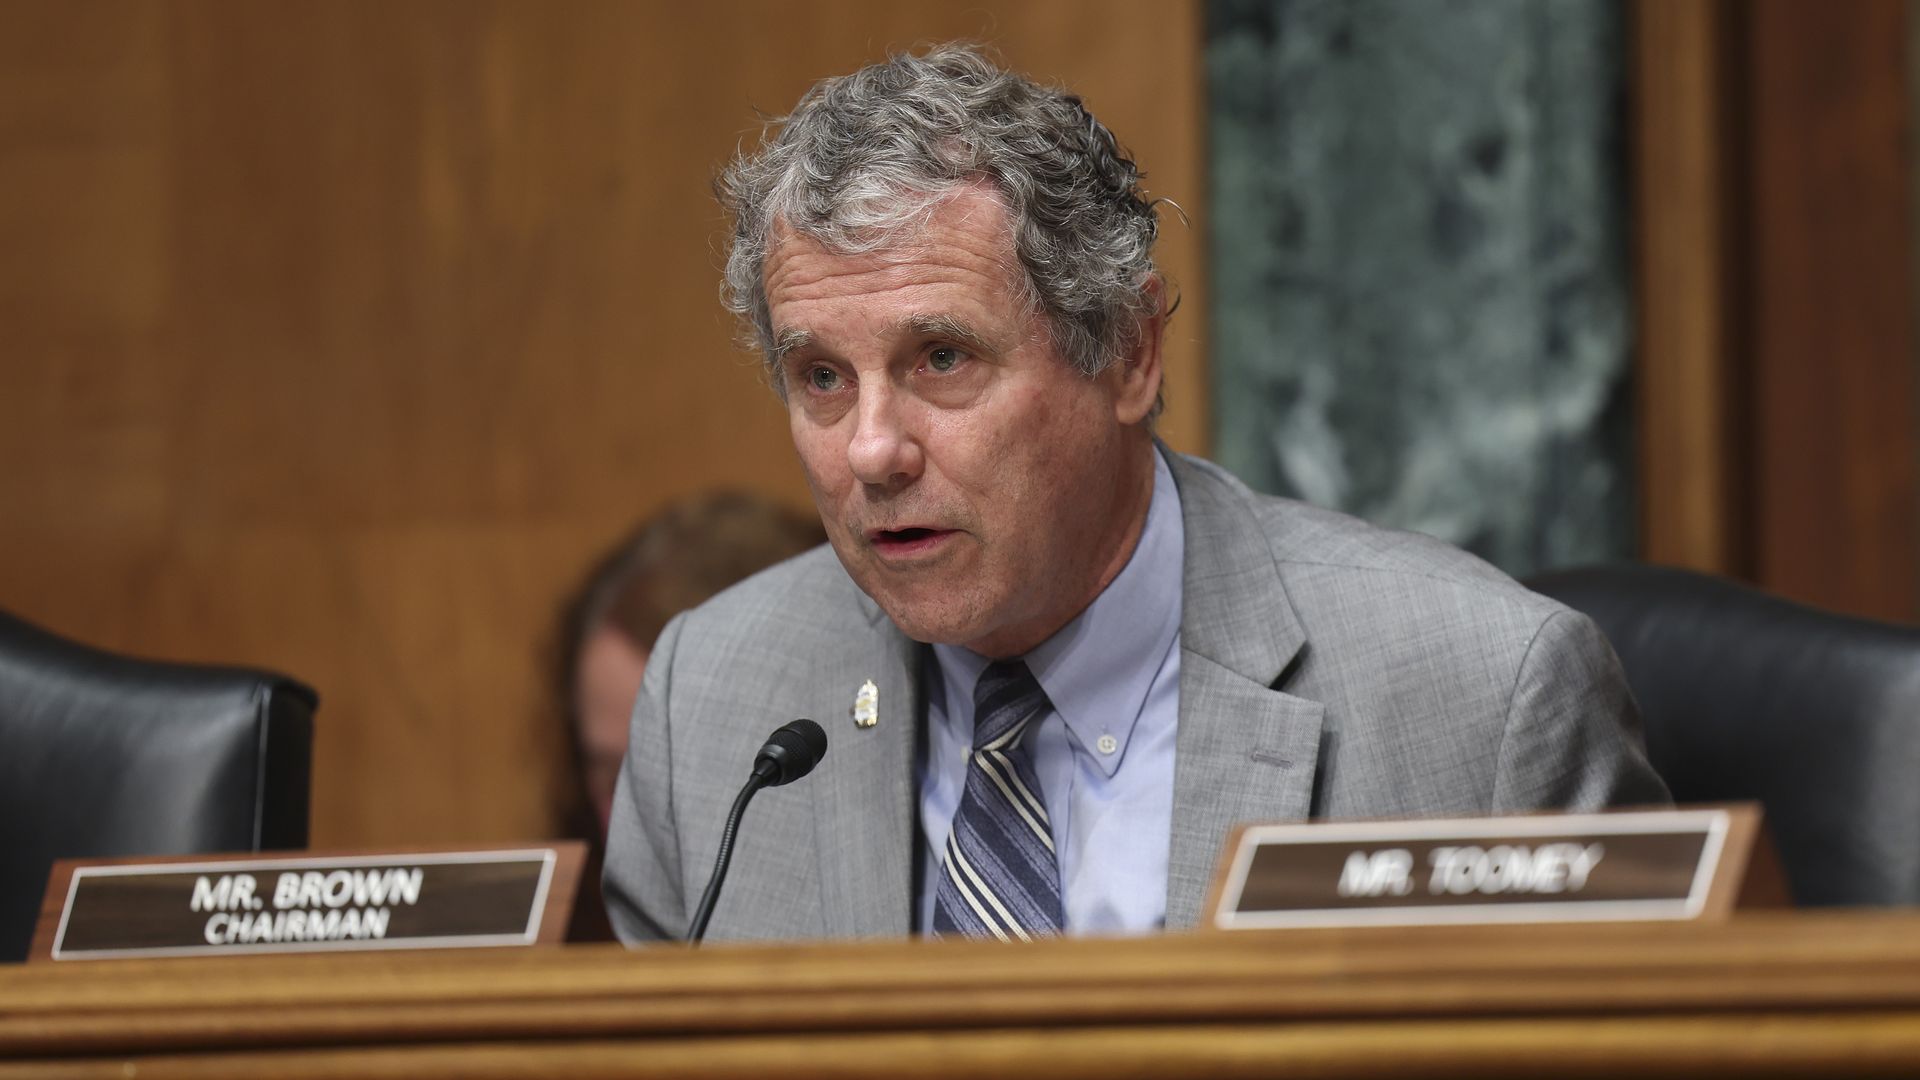 Sen. Sherrod Brown in a gray suit, seated behind his nameplate during Senate testimony